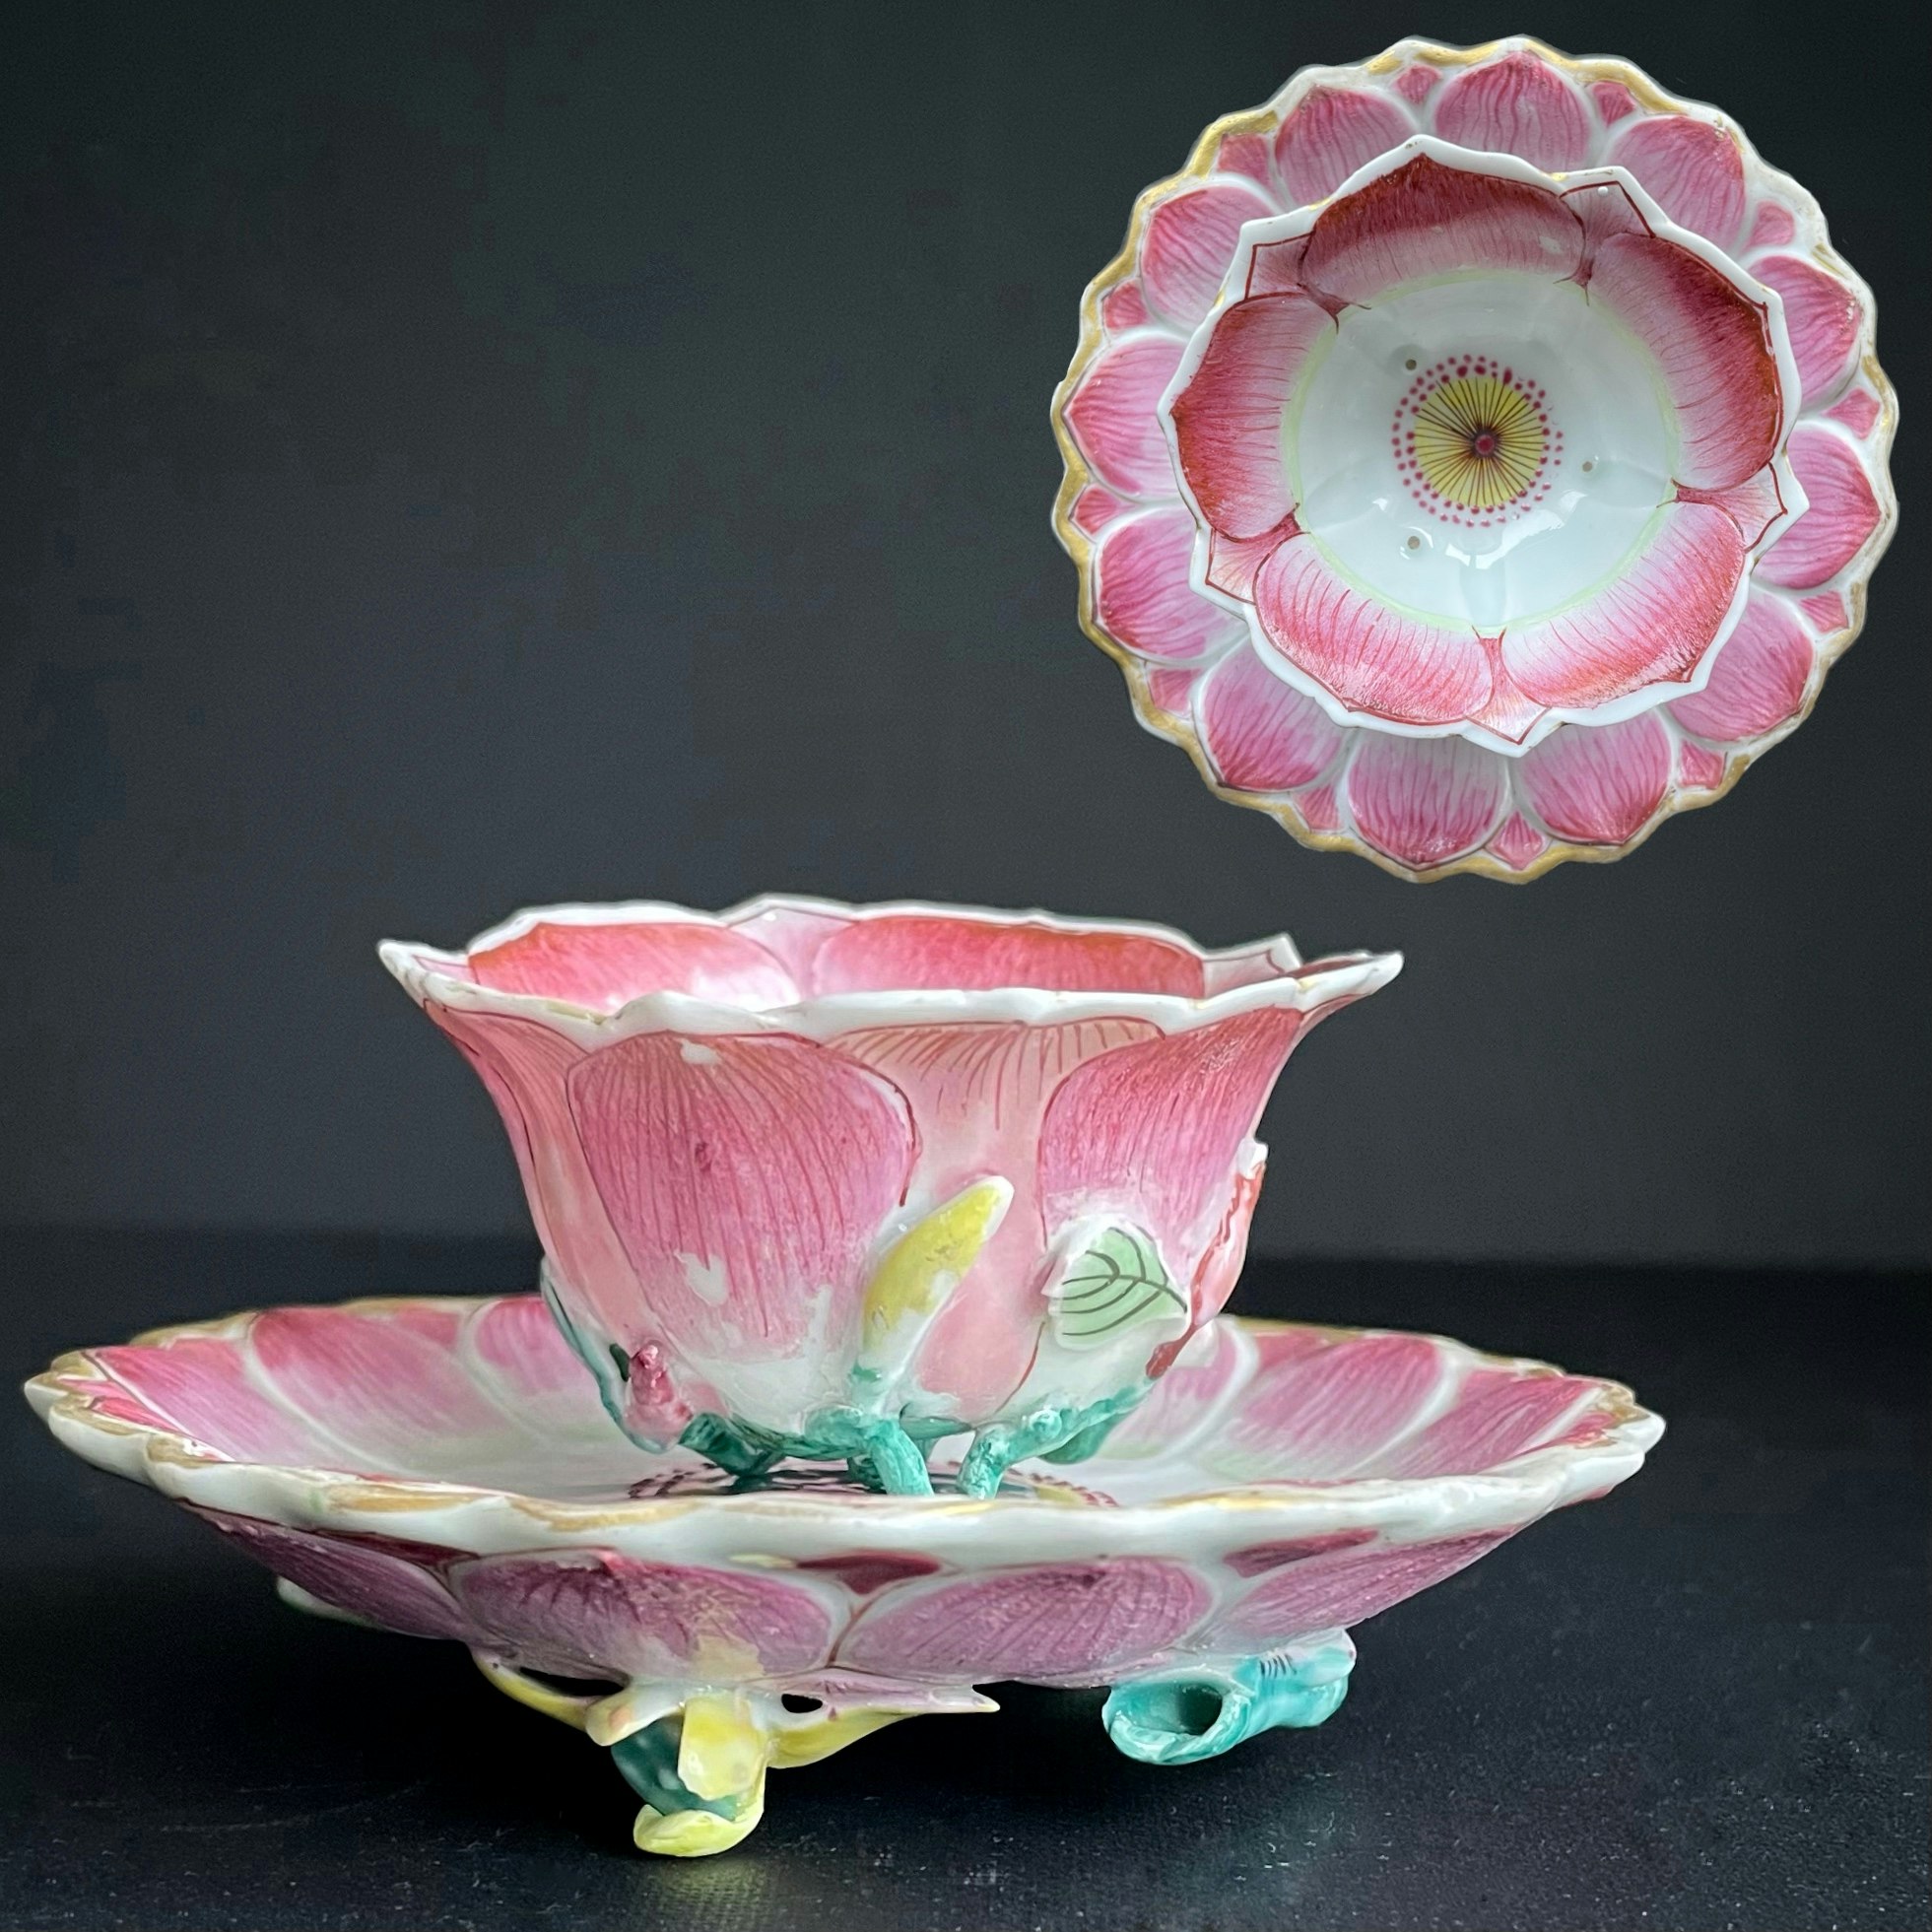 Antique Chinese Porcelain Lotus teacup and saucer Yongzheng Period 18th c #913